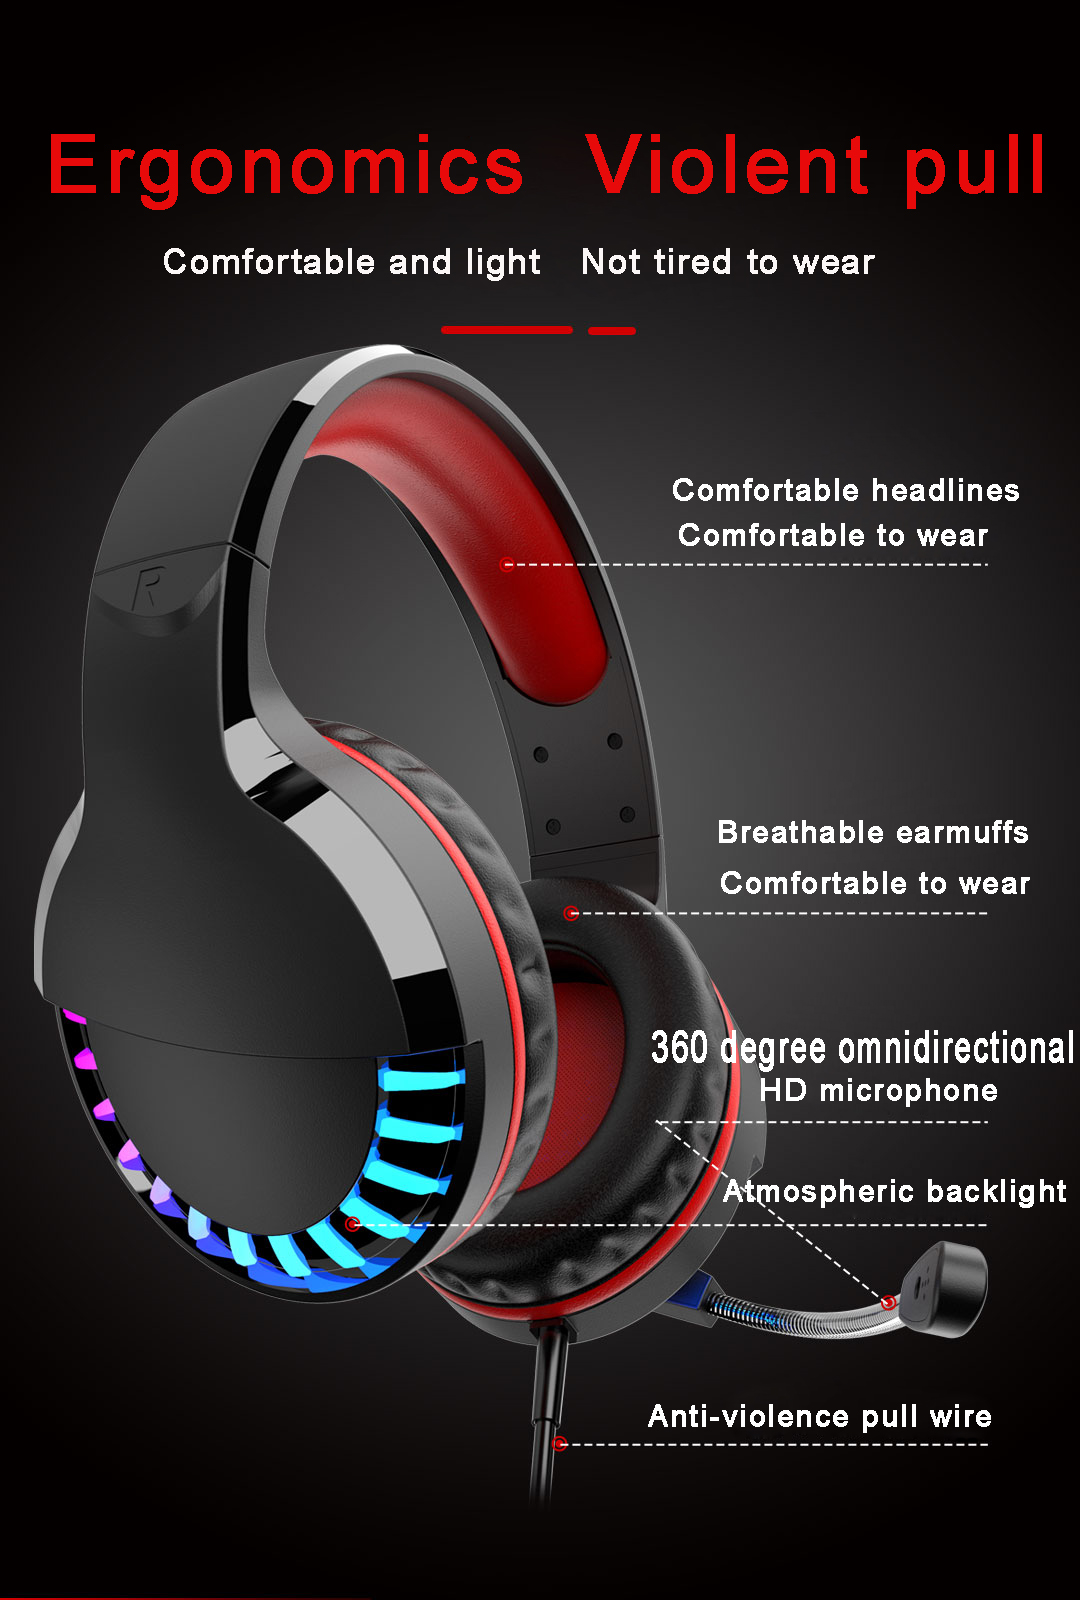 M18-Gaming-Headphones-Luminous-Colorful-Headset-35mm-Stereo-Earphone-with-Microphone-For-XBox-PS4-Ga-1722974-6